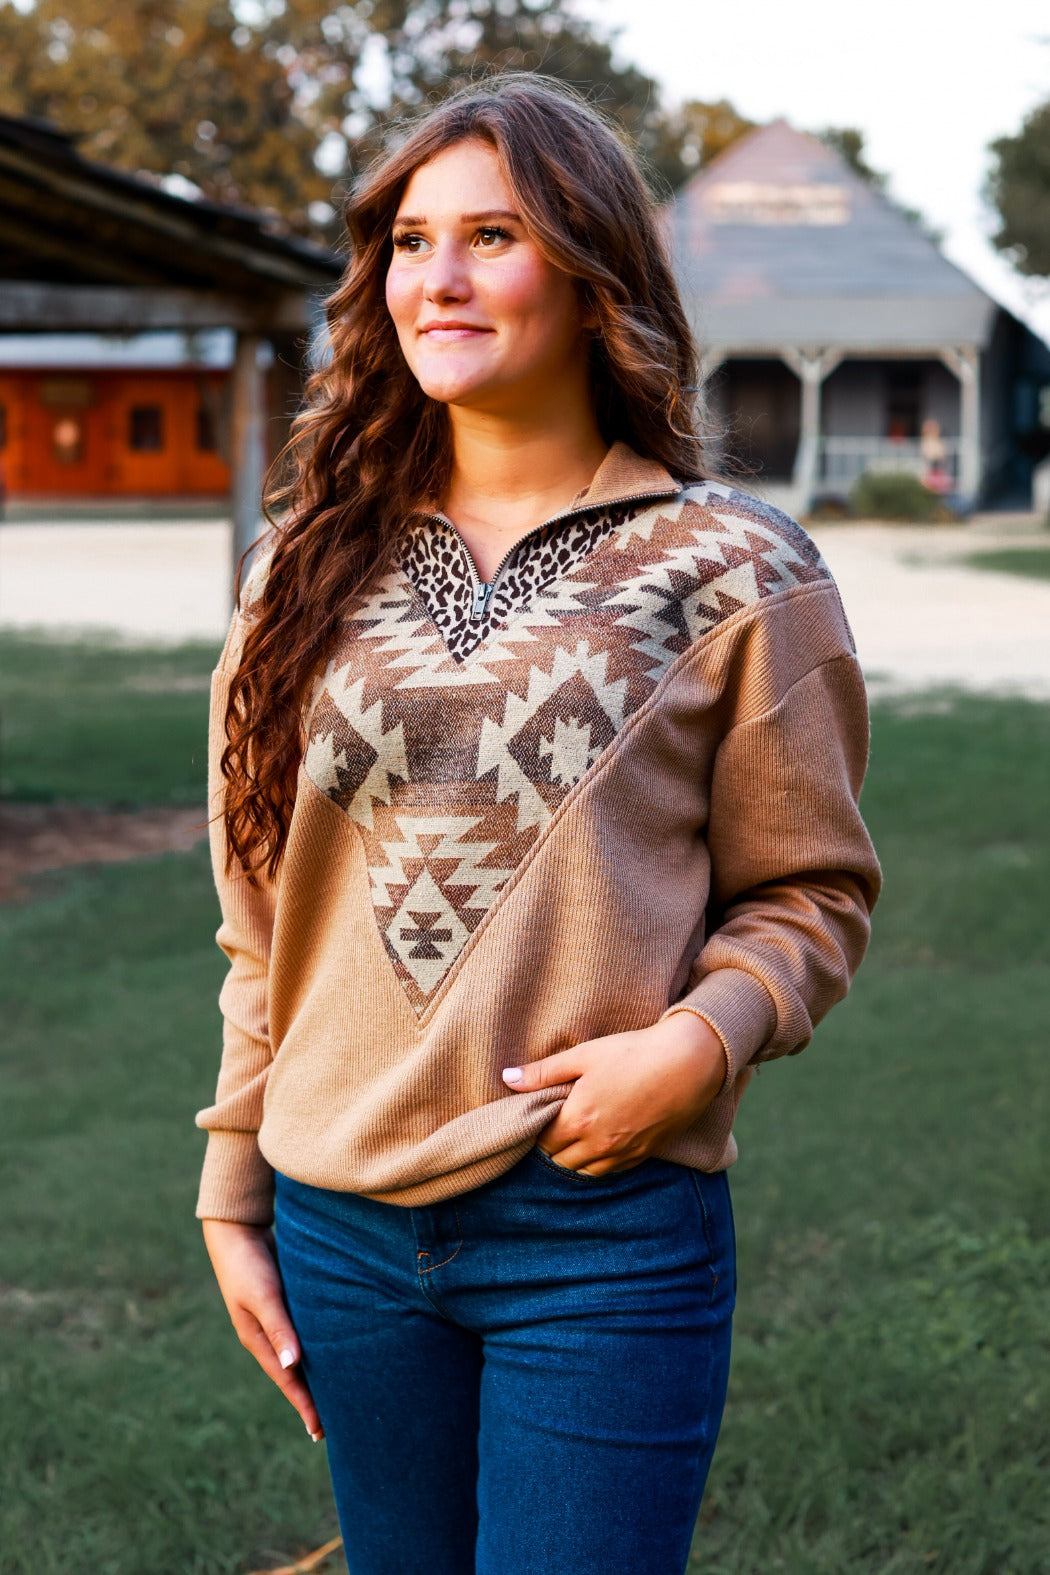 Searching for Adventure Tan Pullover